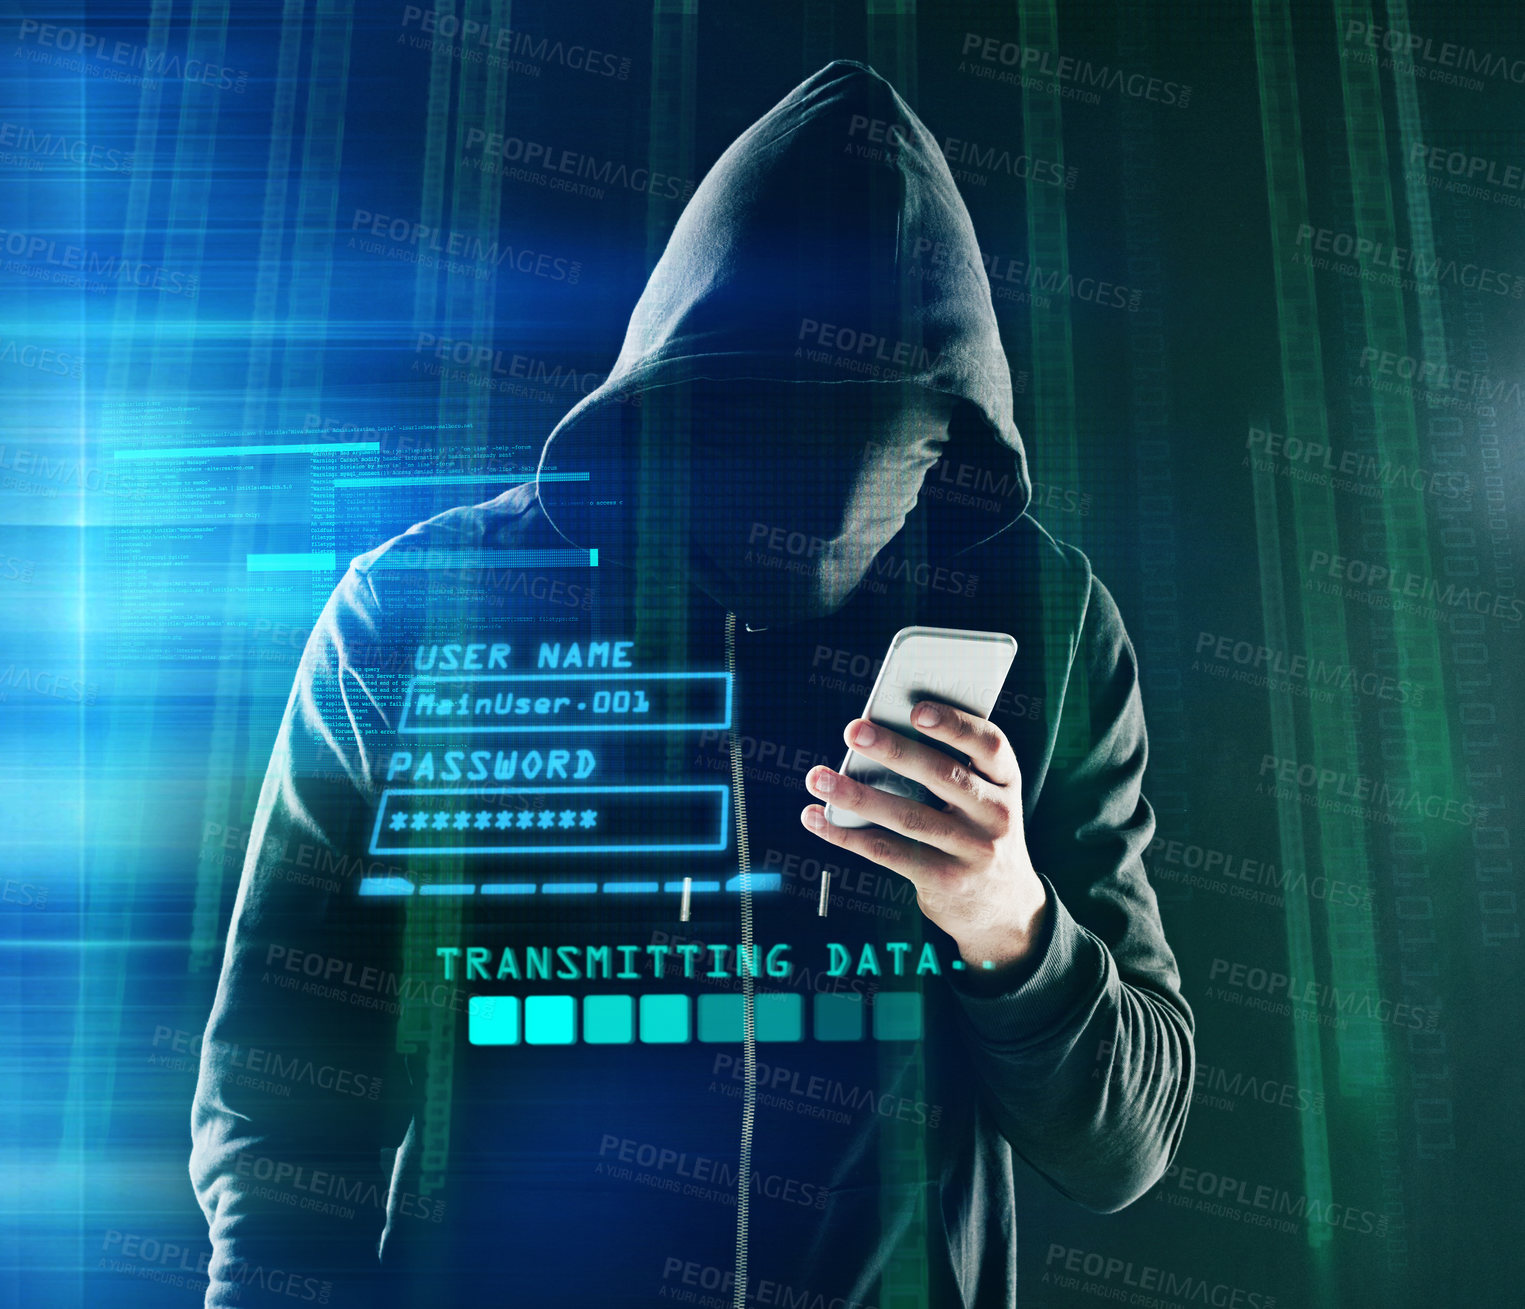 Buy stock photo Shot of an unidentifiable computer hacker using a smartphone while standing against a dark background